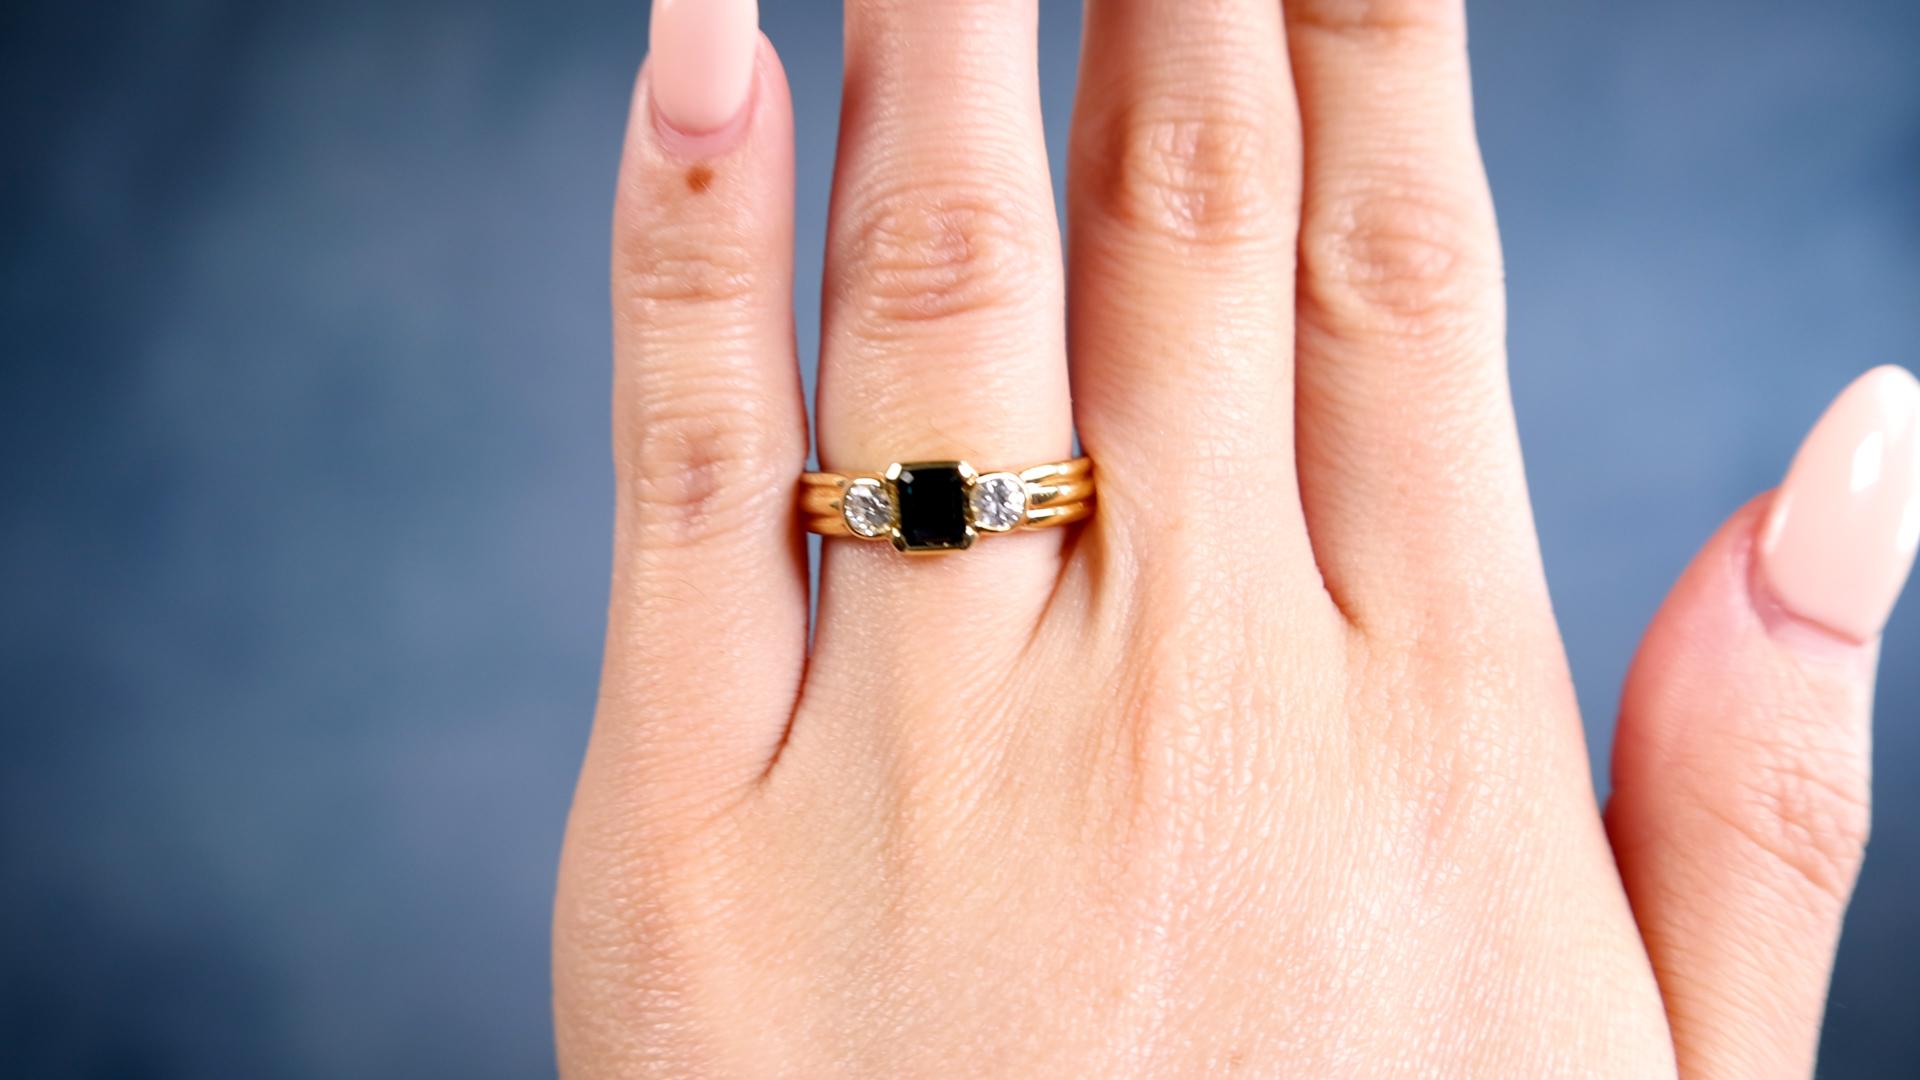 One Vintage Italian Sapphire Diamond 18k Yellow Gold Three Stone Ring. Featuring one octagonal step cut dark blue sapphire weighing approximately 0.50 carat. Accented by two round brilliant cut diamonds with a total weight of approximately 0.40